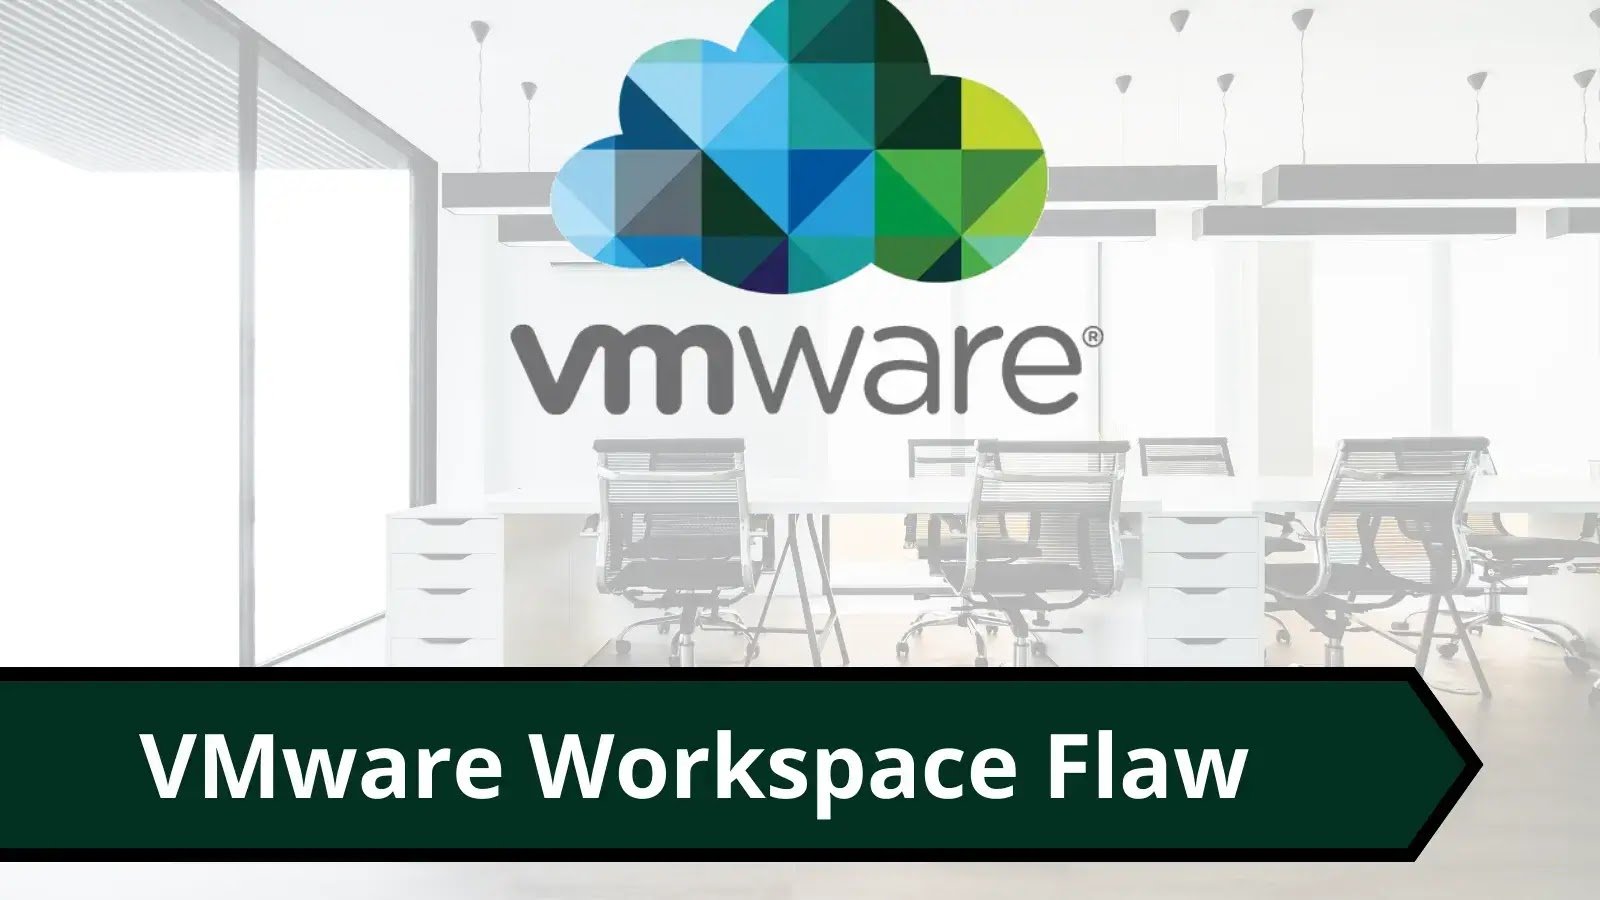 VMware Workspace Flaw Let Attacker Redirect User to Malicious Source.